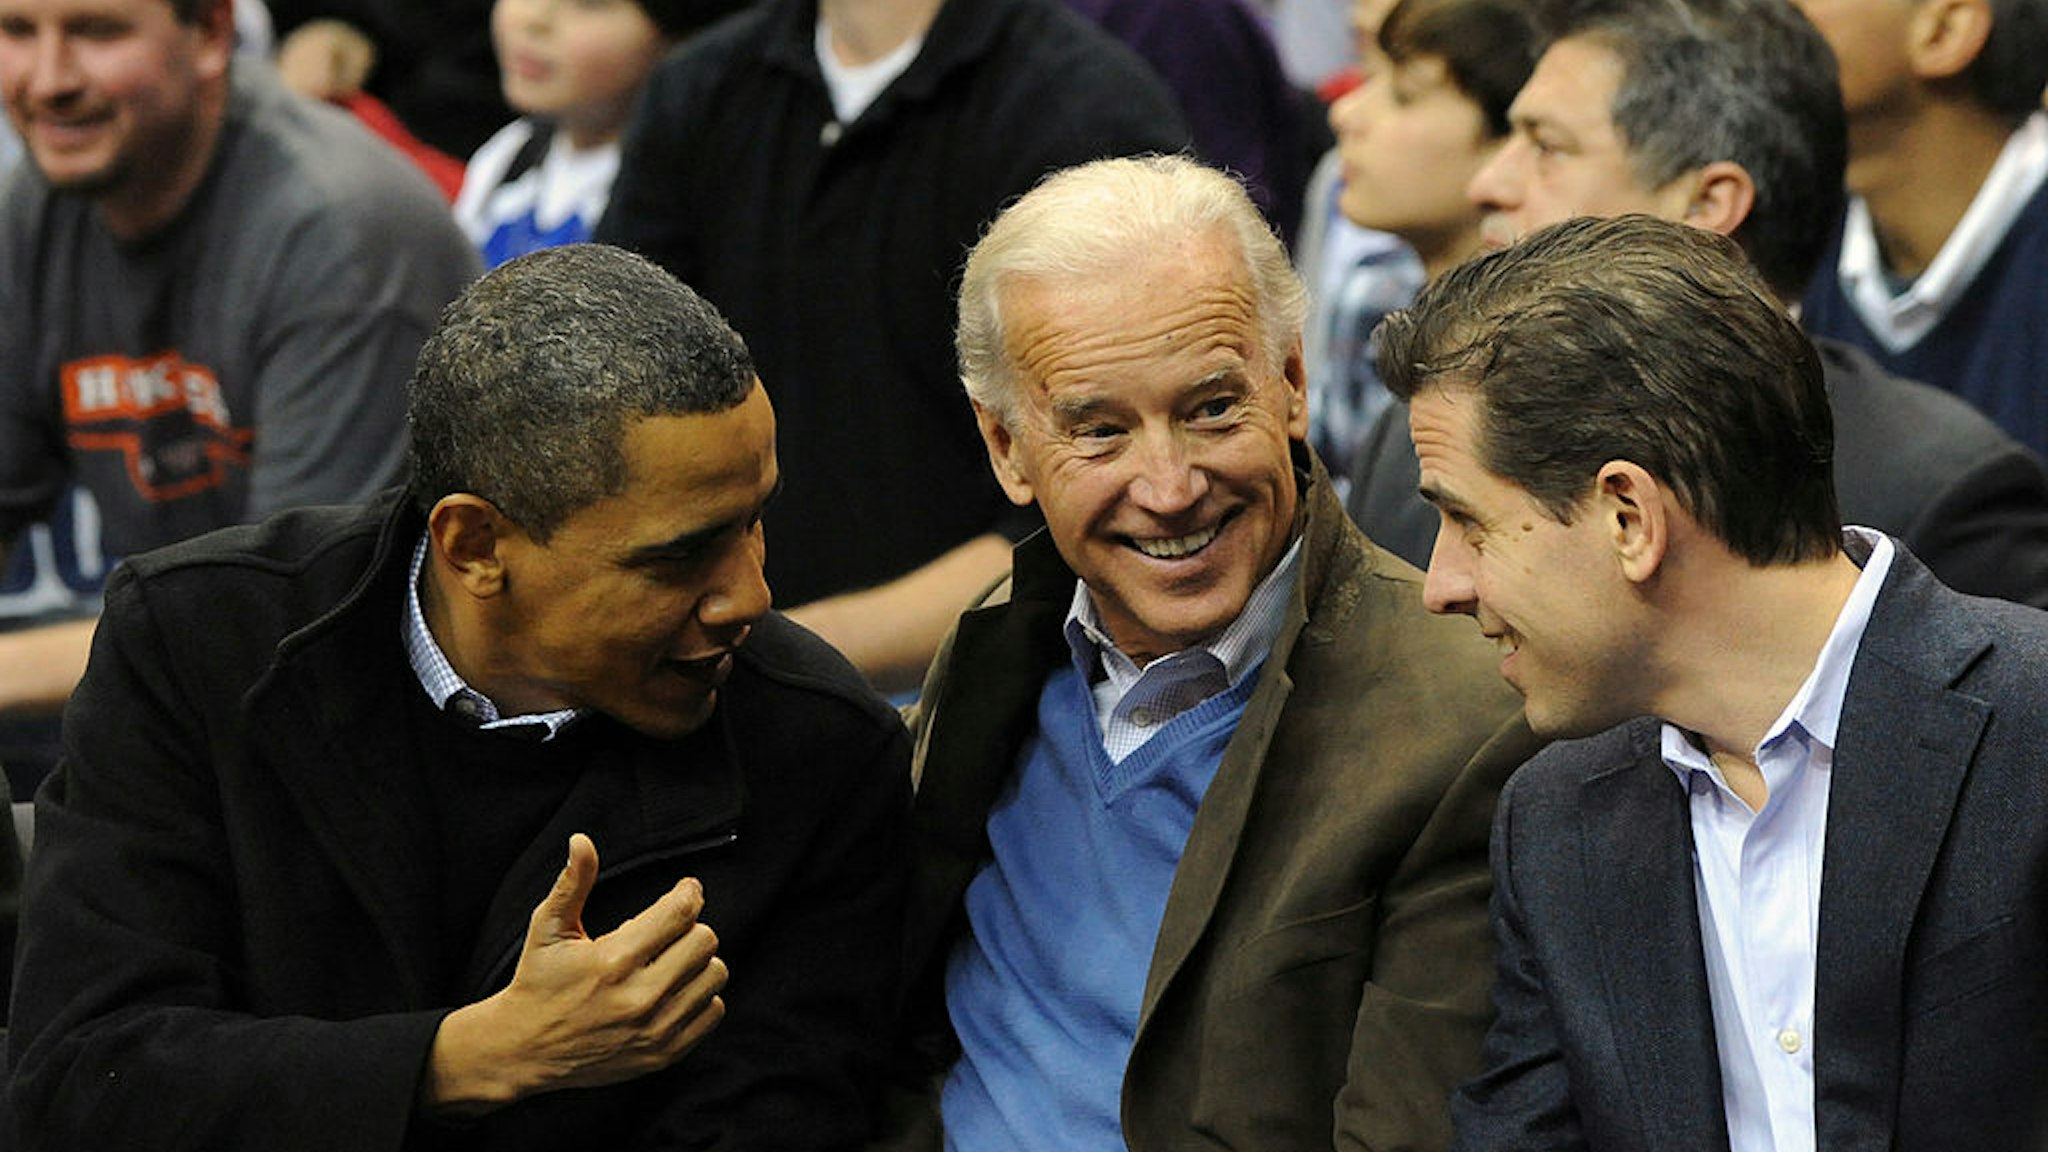 U.S. President Barack Obama (L) greets Vice President Joe Biden (C) and his son Hunter Biden as they attend the game between the Duke Blue Devils and Georgetown Hoyas on January 30, 2010 at the Verizon Center in Washington, DC. (Photo by Alexis C. Glenn-Pool/Getty Images